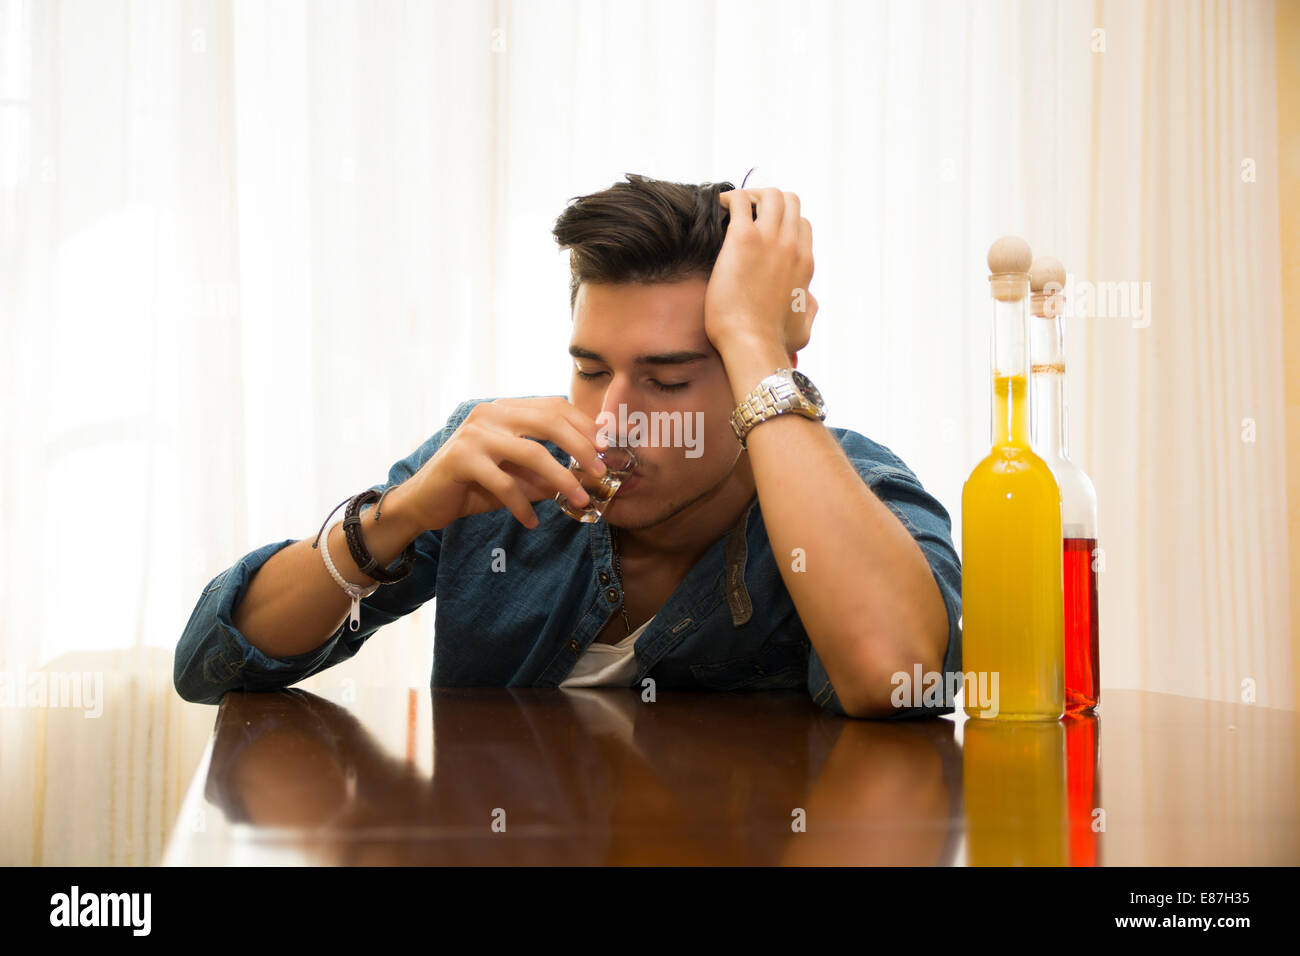 Sleepy, drunk young man sitting drinking alone at a table with two bottles of liquor alongside him sipping from shot glass to Stock Photo